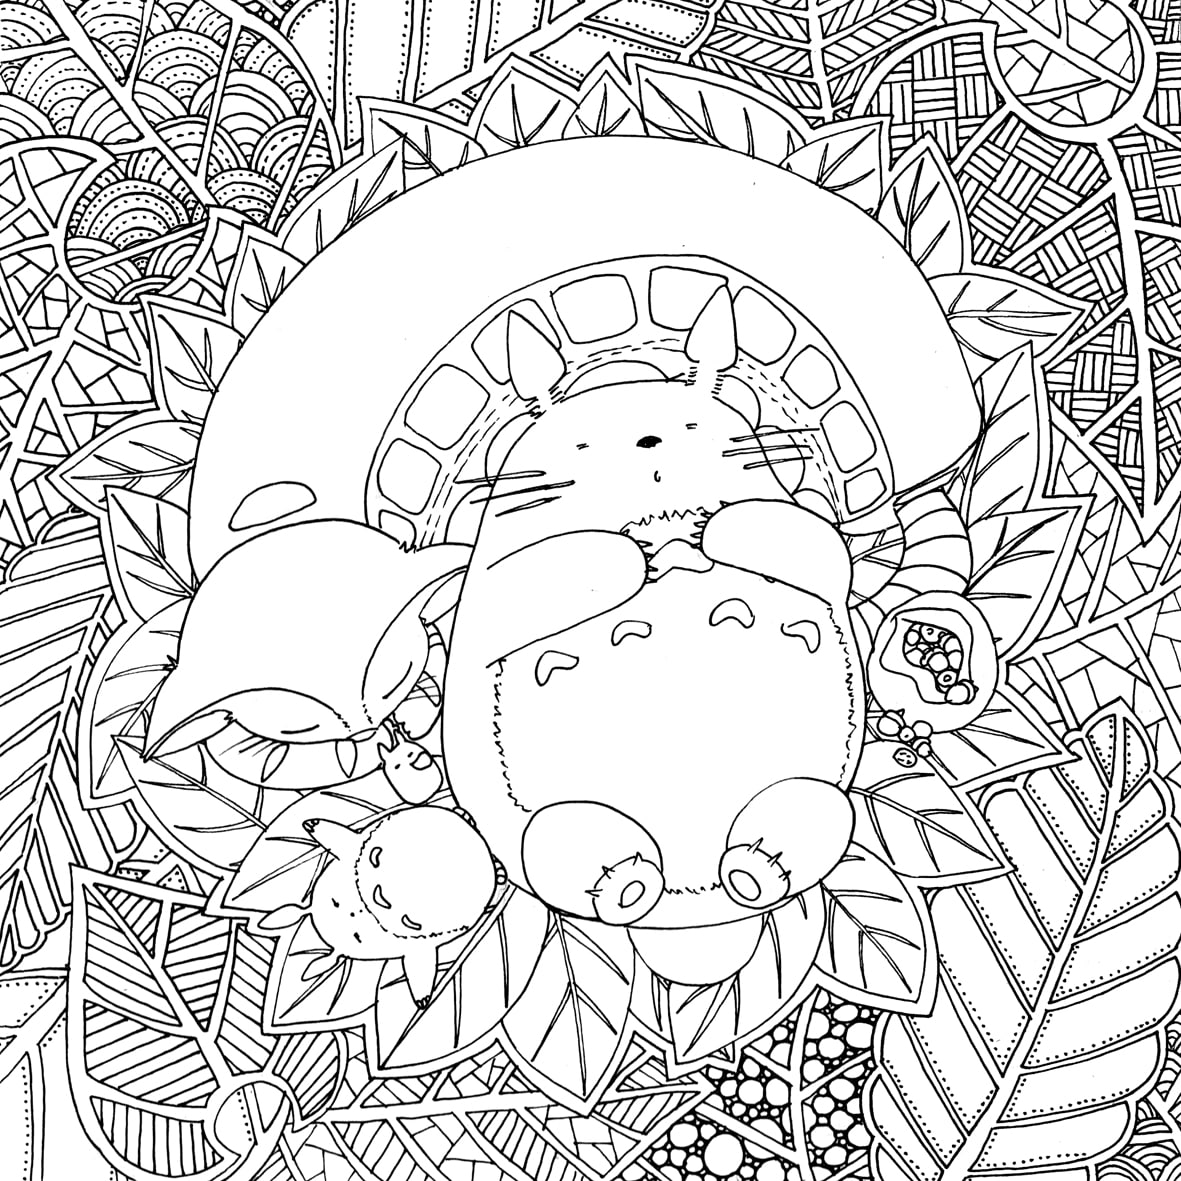 Totoro in Doodleland | le chocobo | coloring pages of animals